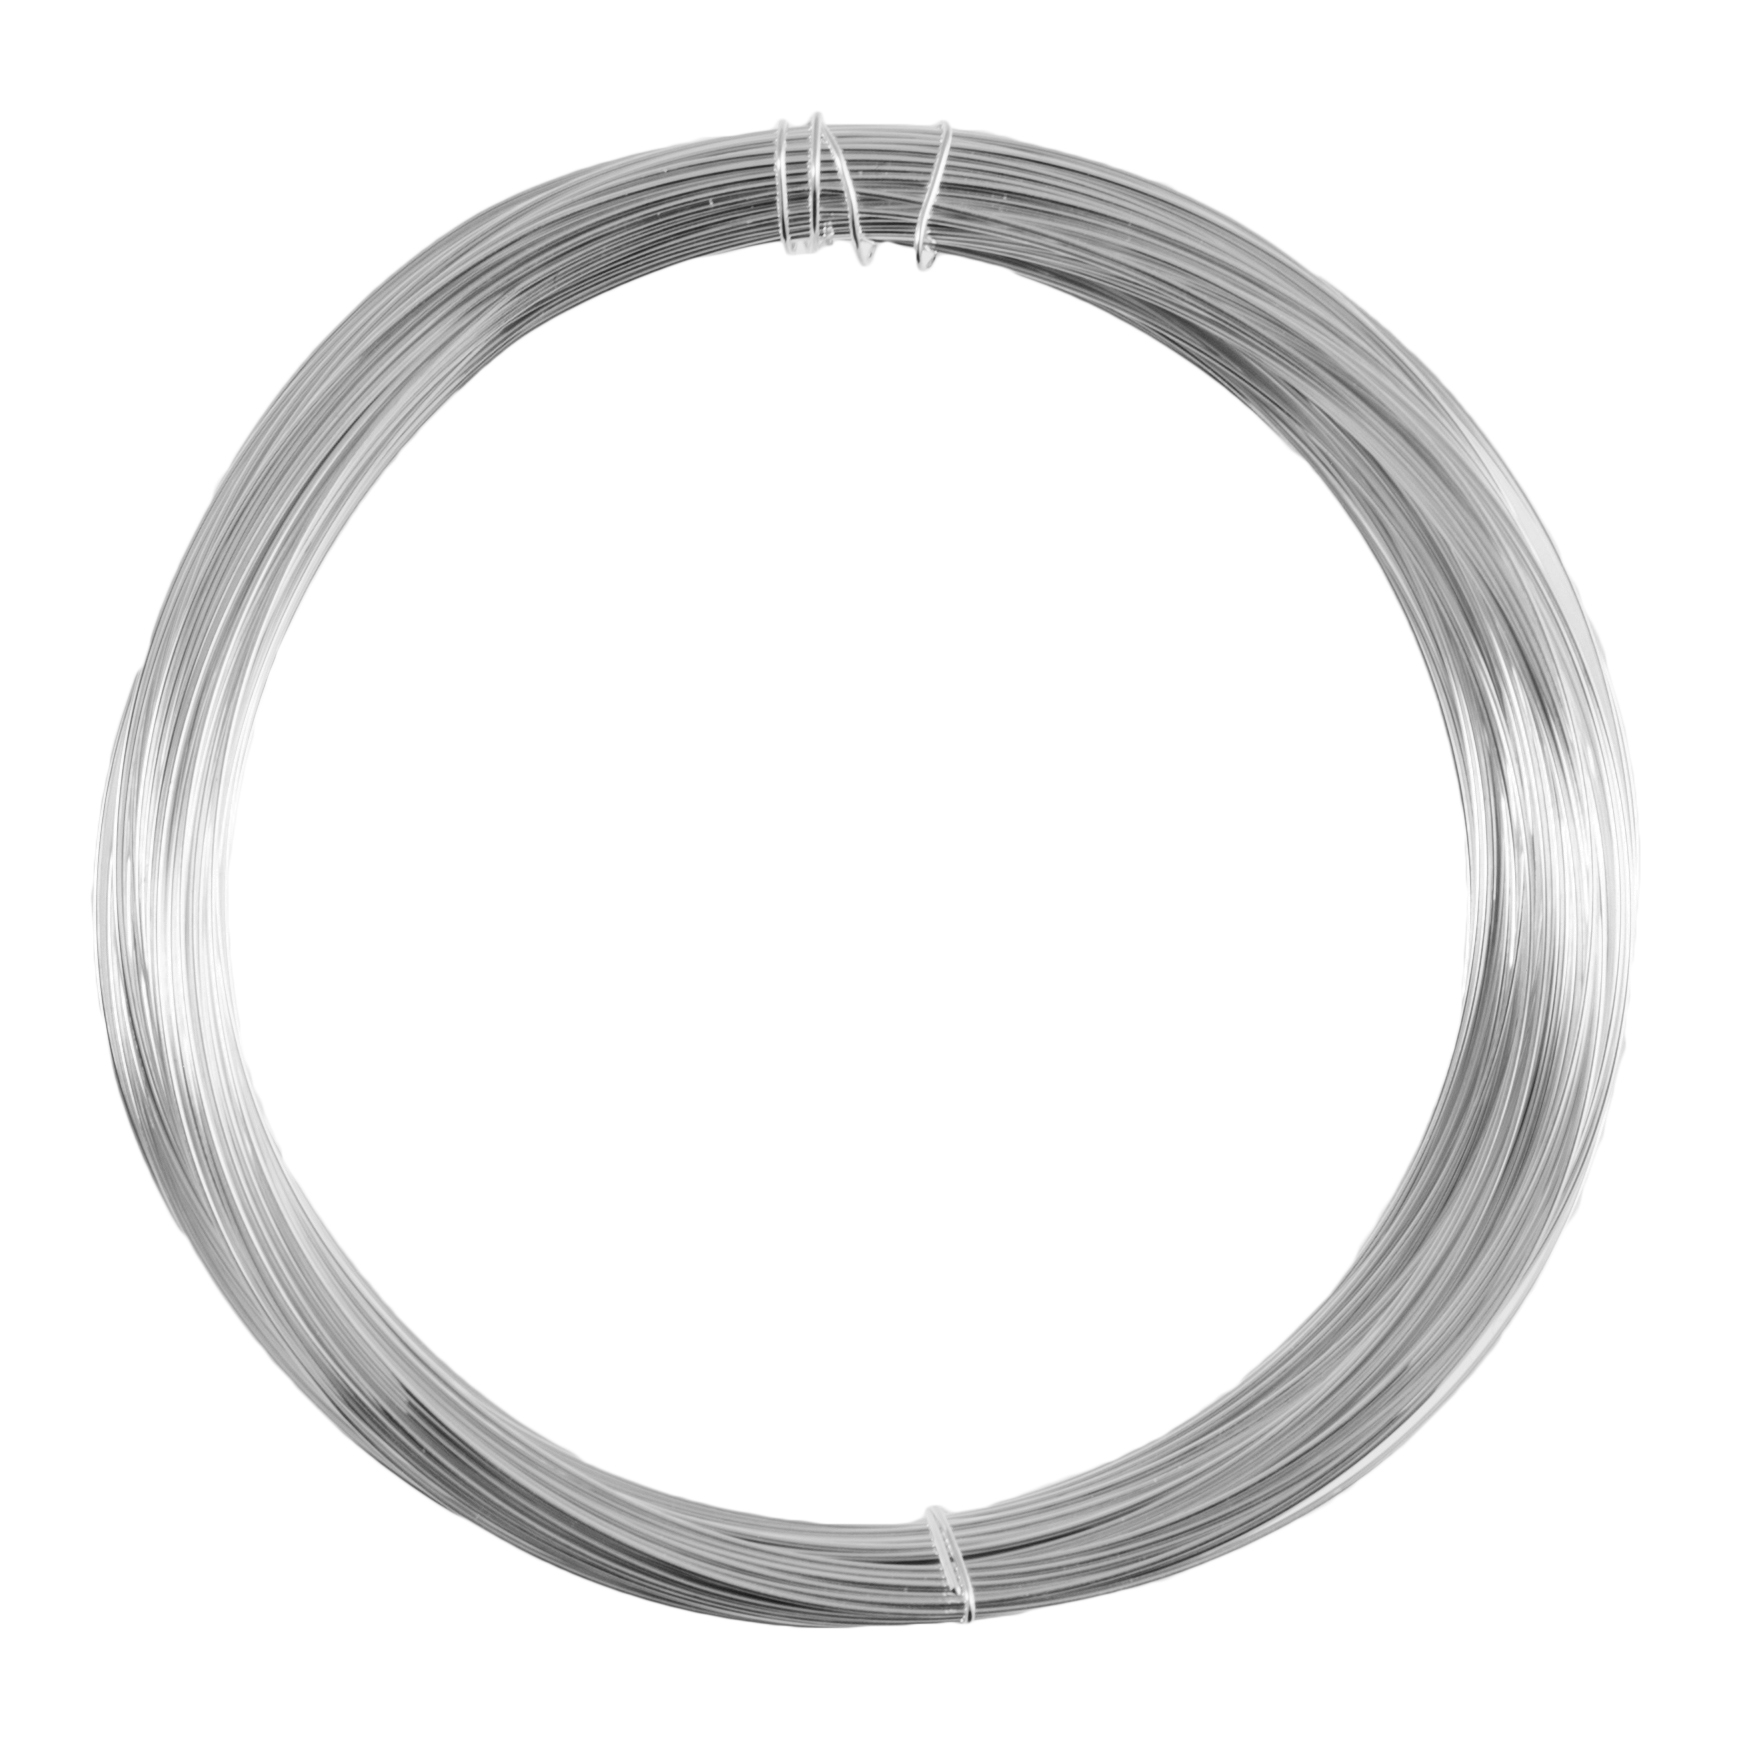 Picture of Wire: 1 Pack of 20m x 0.4mm: Silver Plated